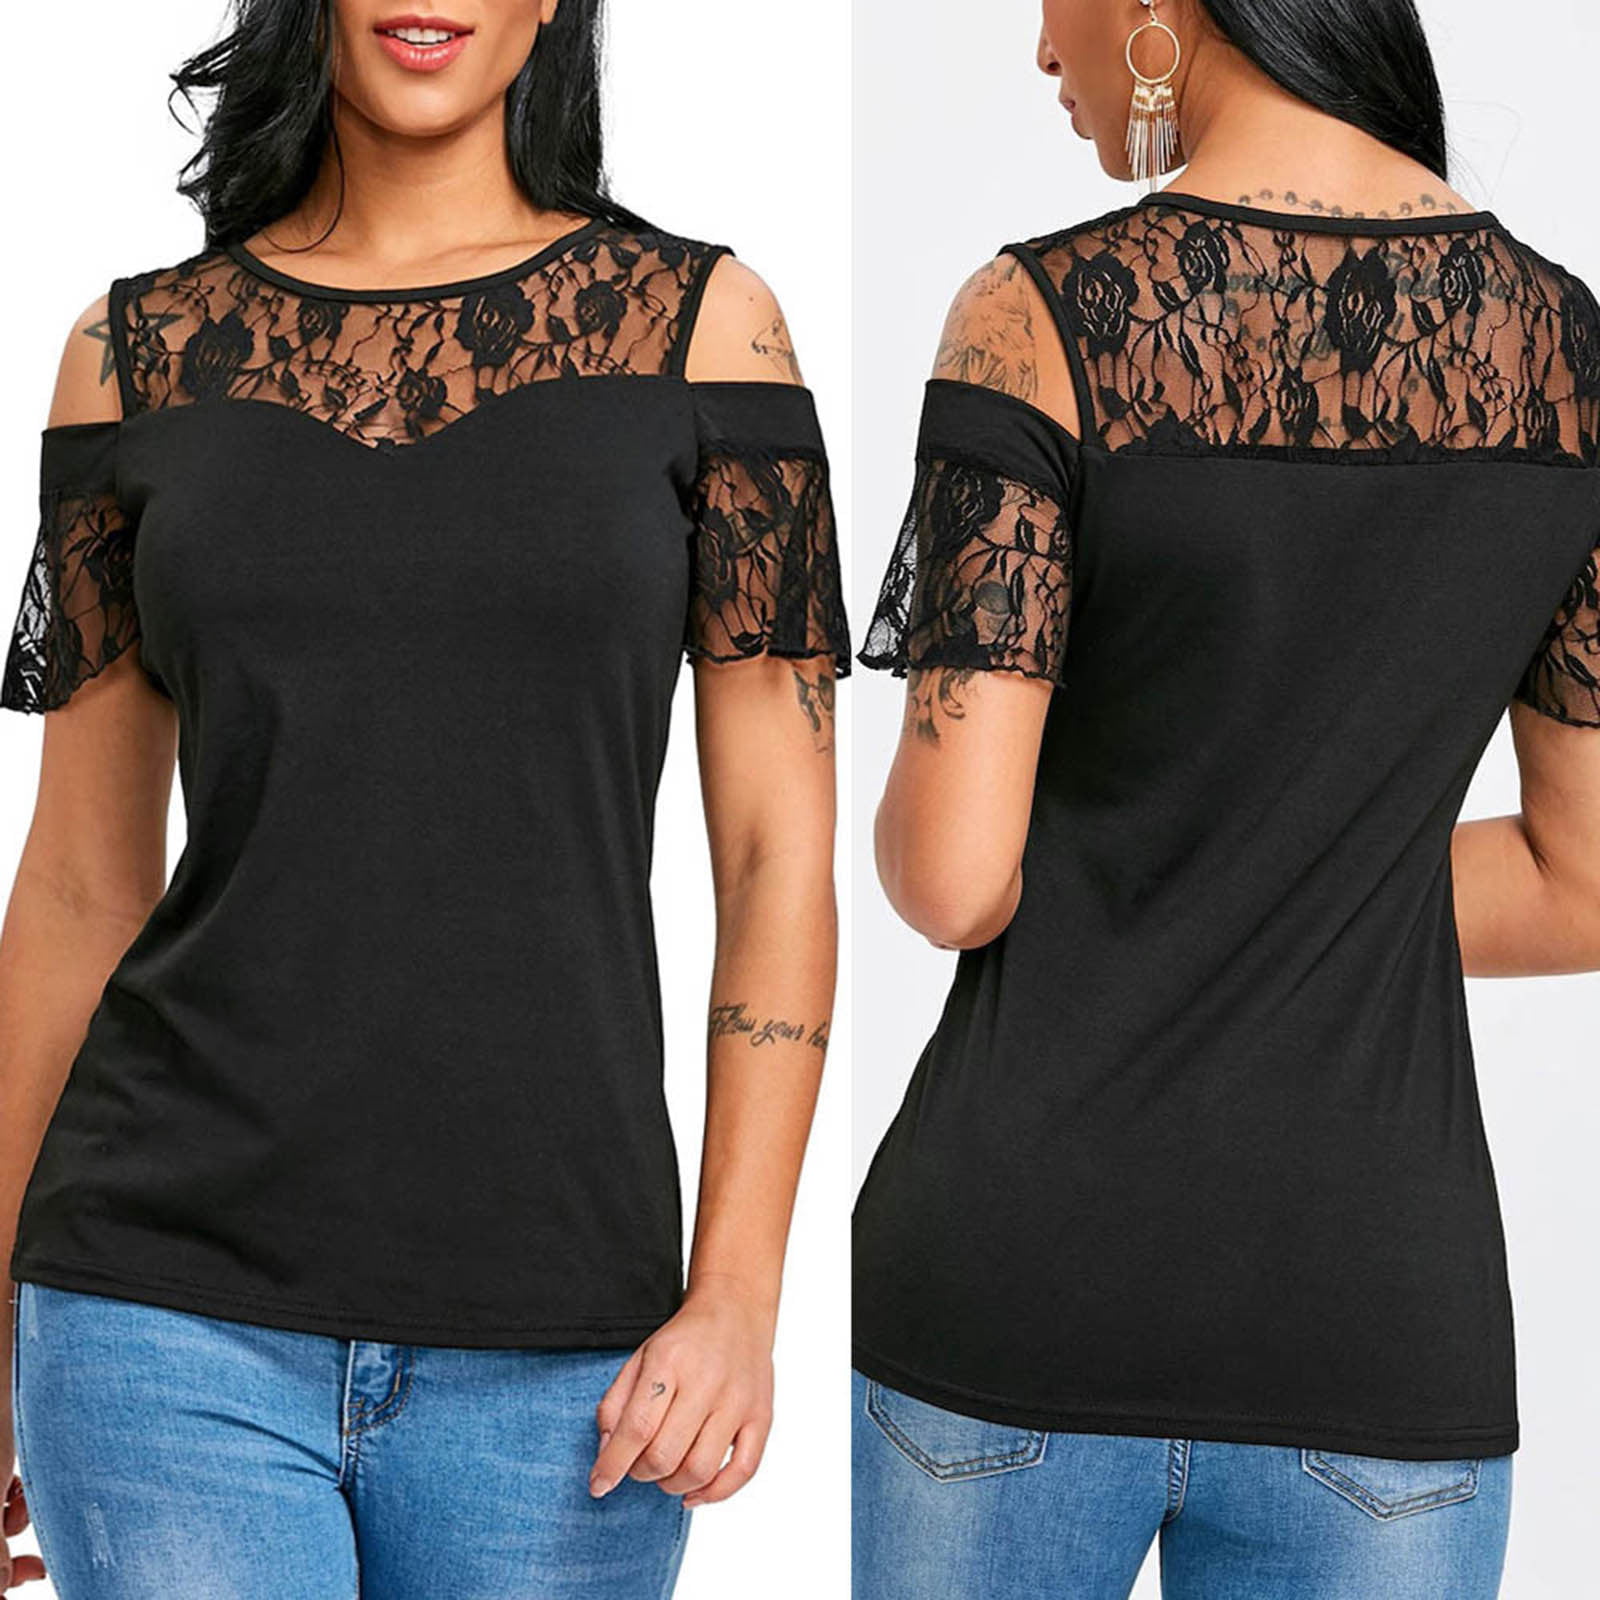 Women Fashion Casual Short Sleeve O-Neck Flower Lace Blouse Tops T-Shirt